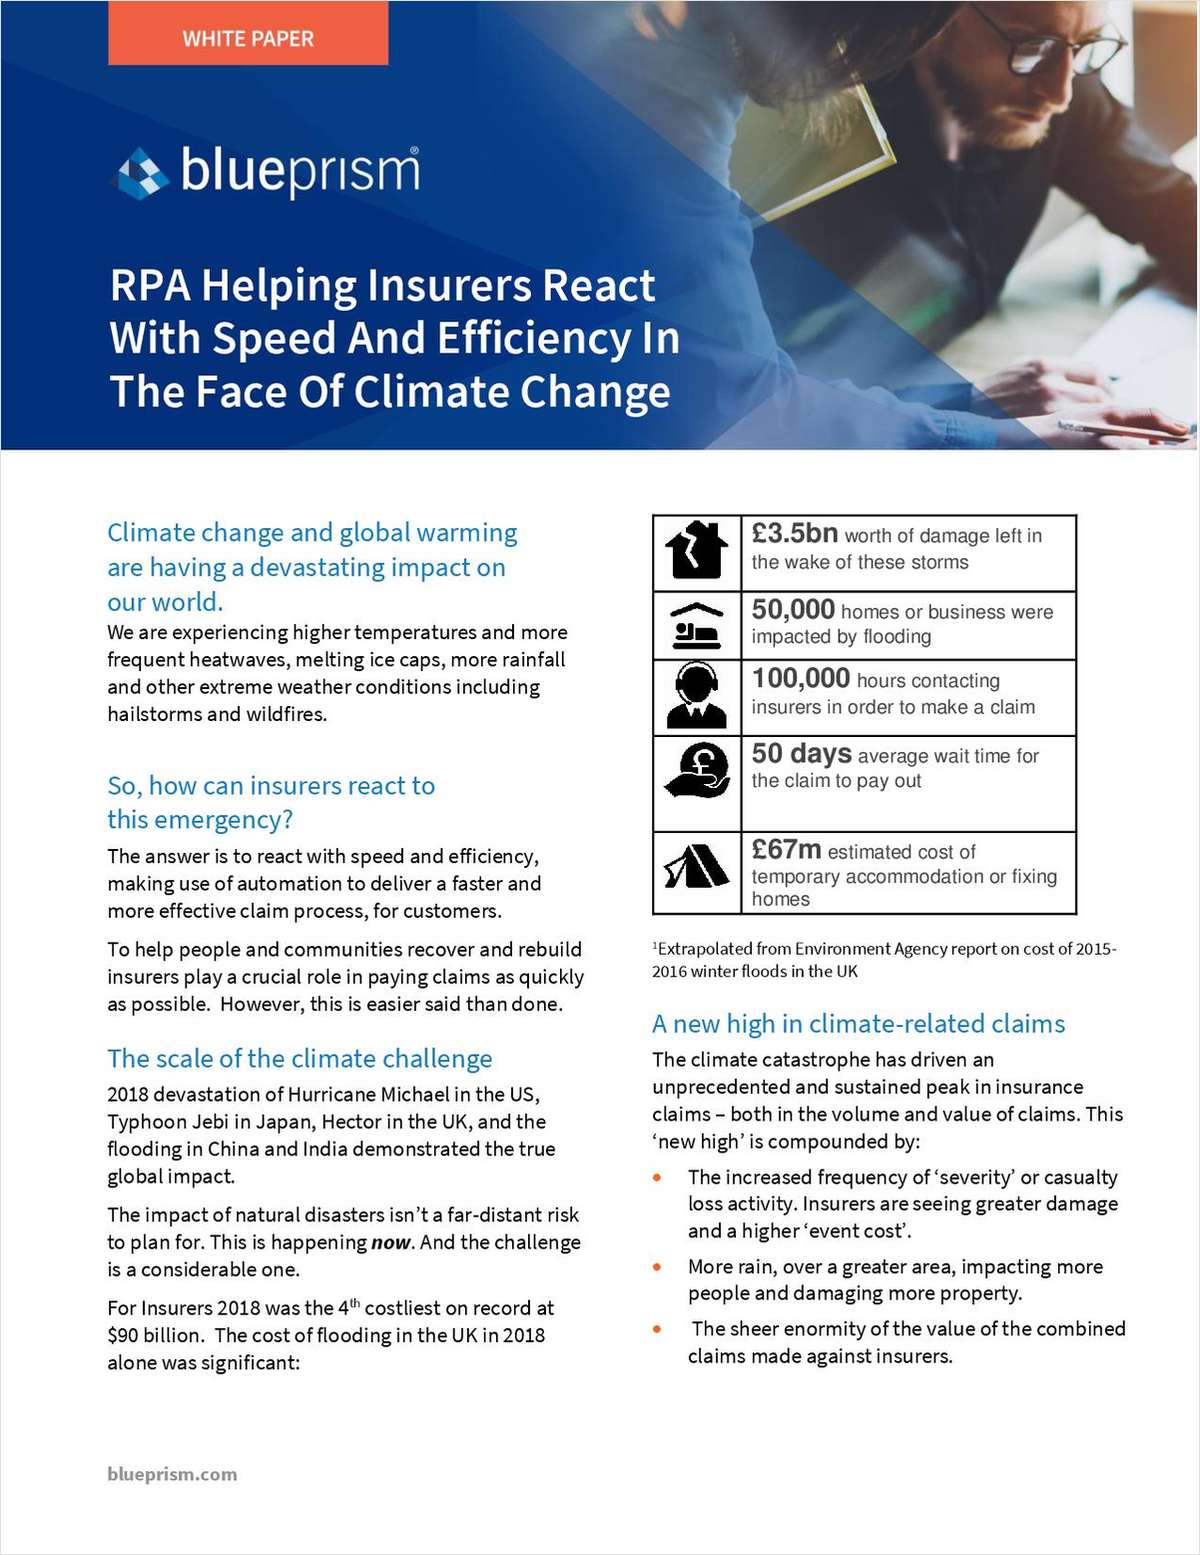 RPA Helping Insurers React With Speed And Efficiency In The Face Of Climate Change